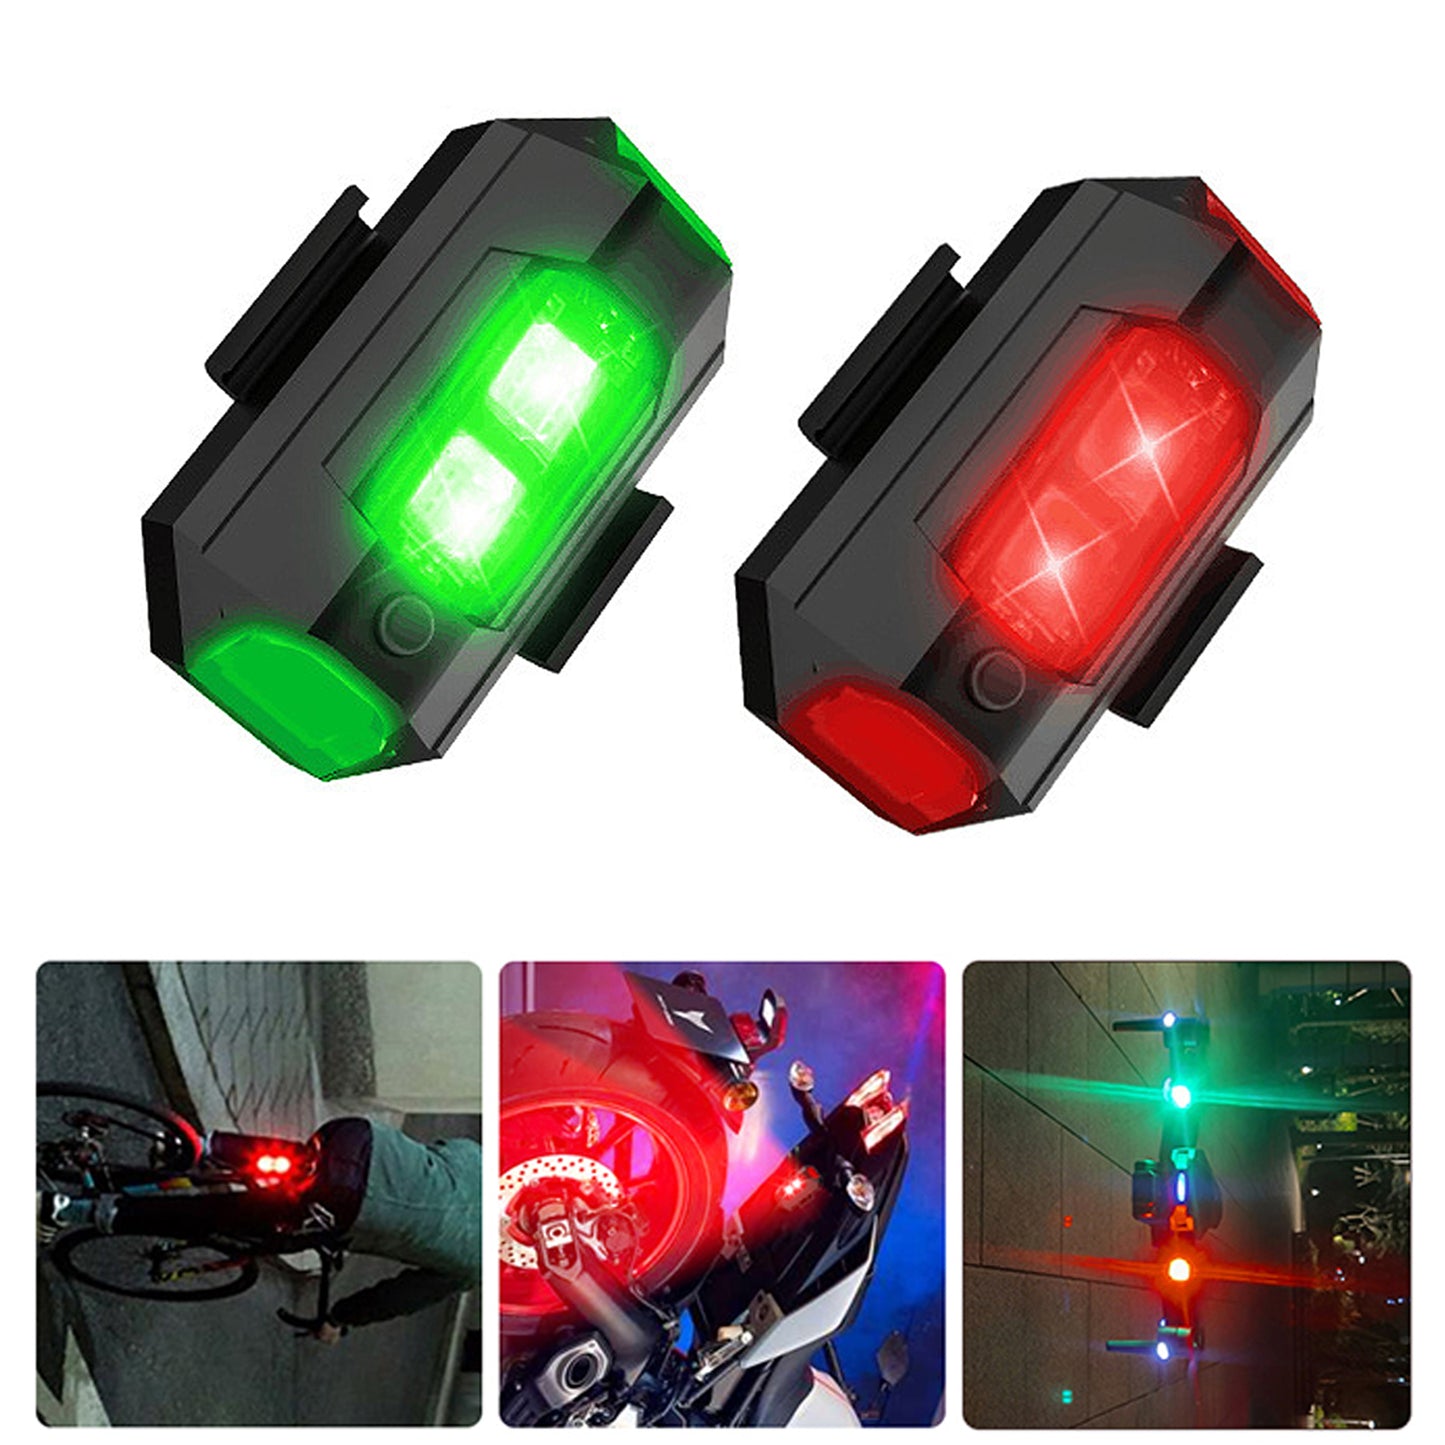 WRADER Aircraft Light for Drones Bikes Cars and Helmet Strobe Light for Bikes with 7 Colors Light and Flashing Modes LED Strobe Light for Helmets Drones Led Light (Black)